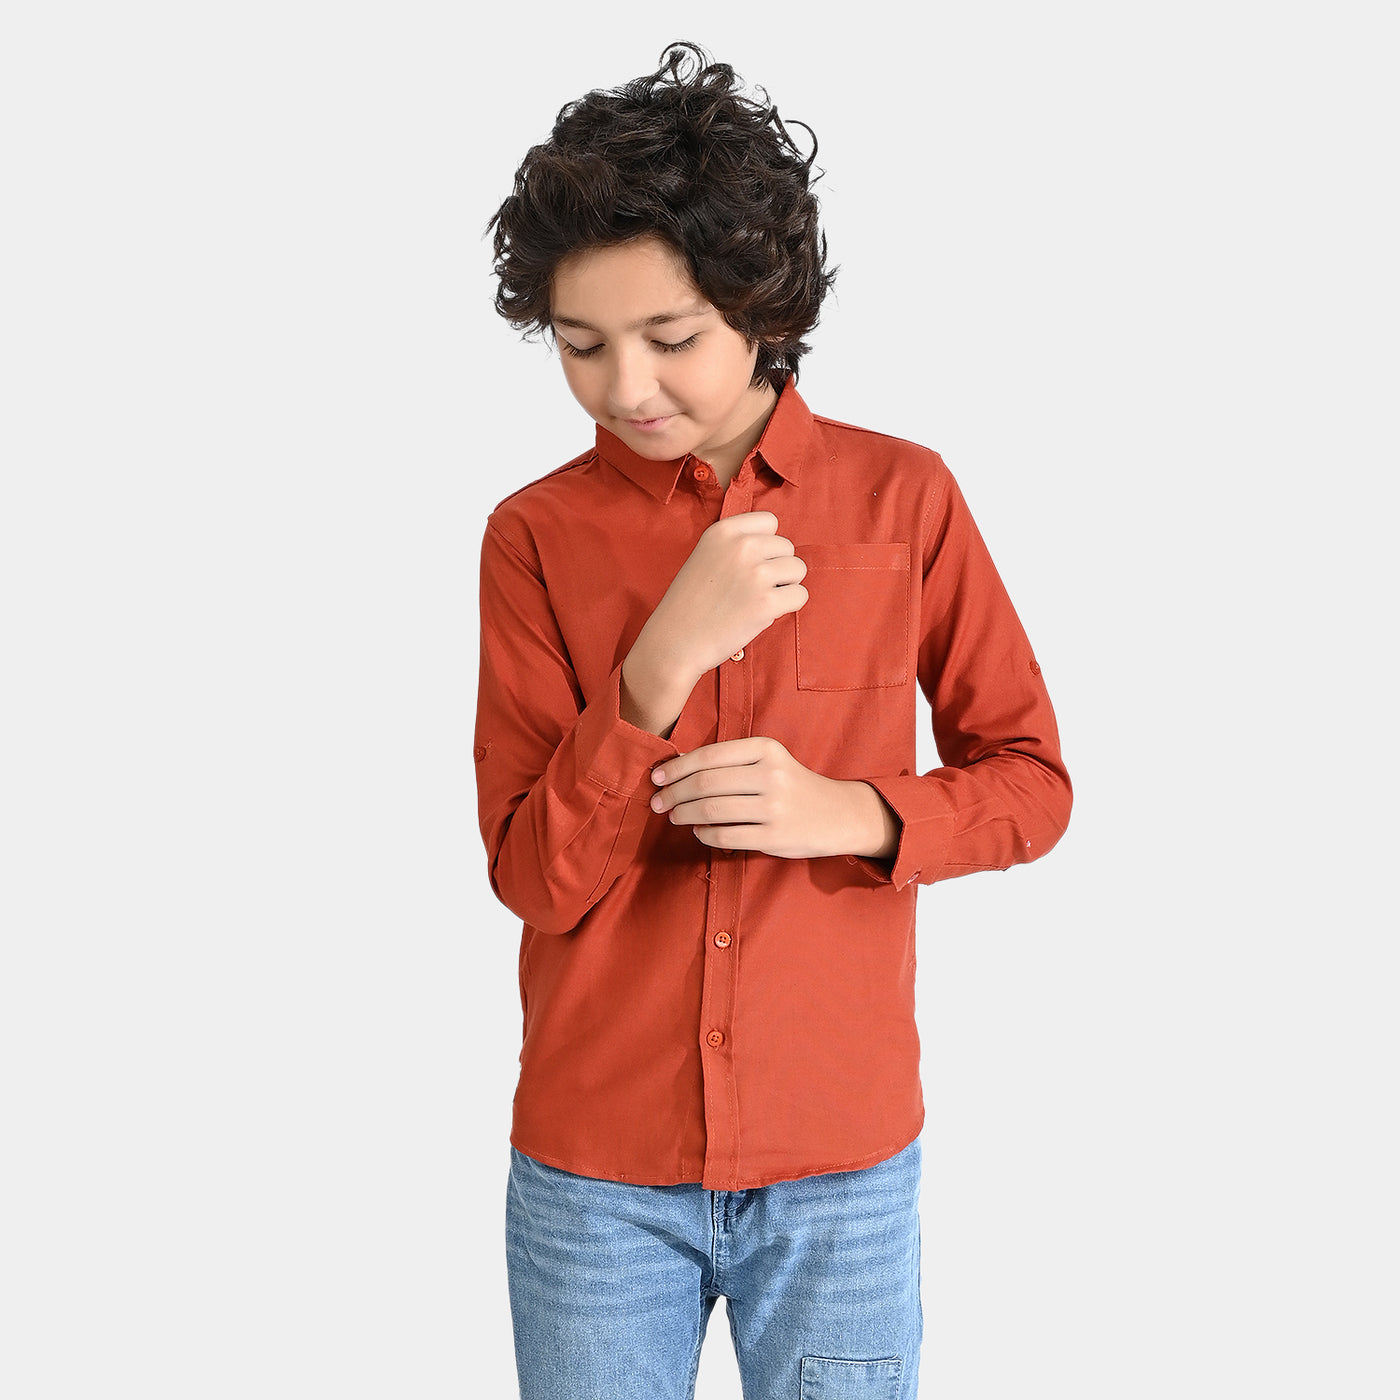 Boys Cotton Casual Shirt F/S Hero-Red